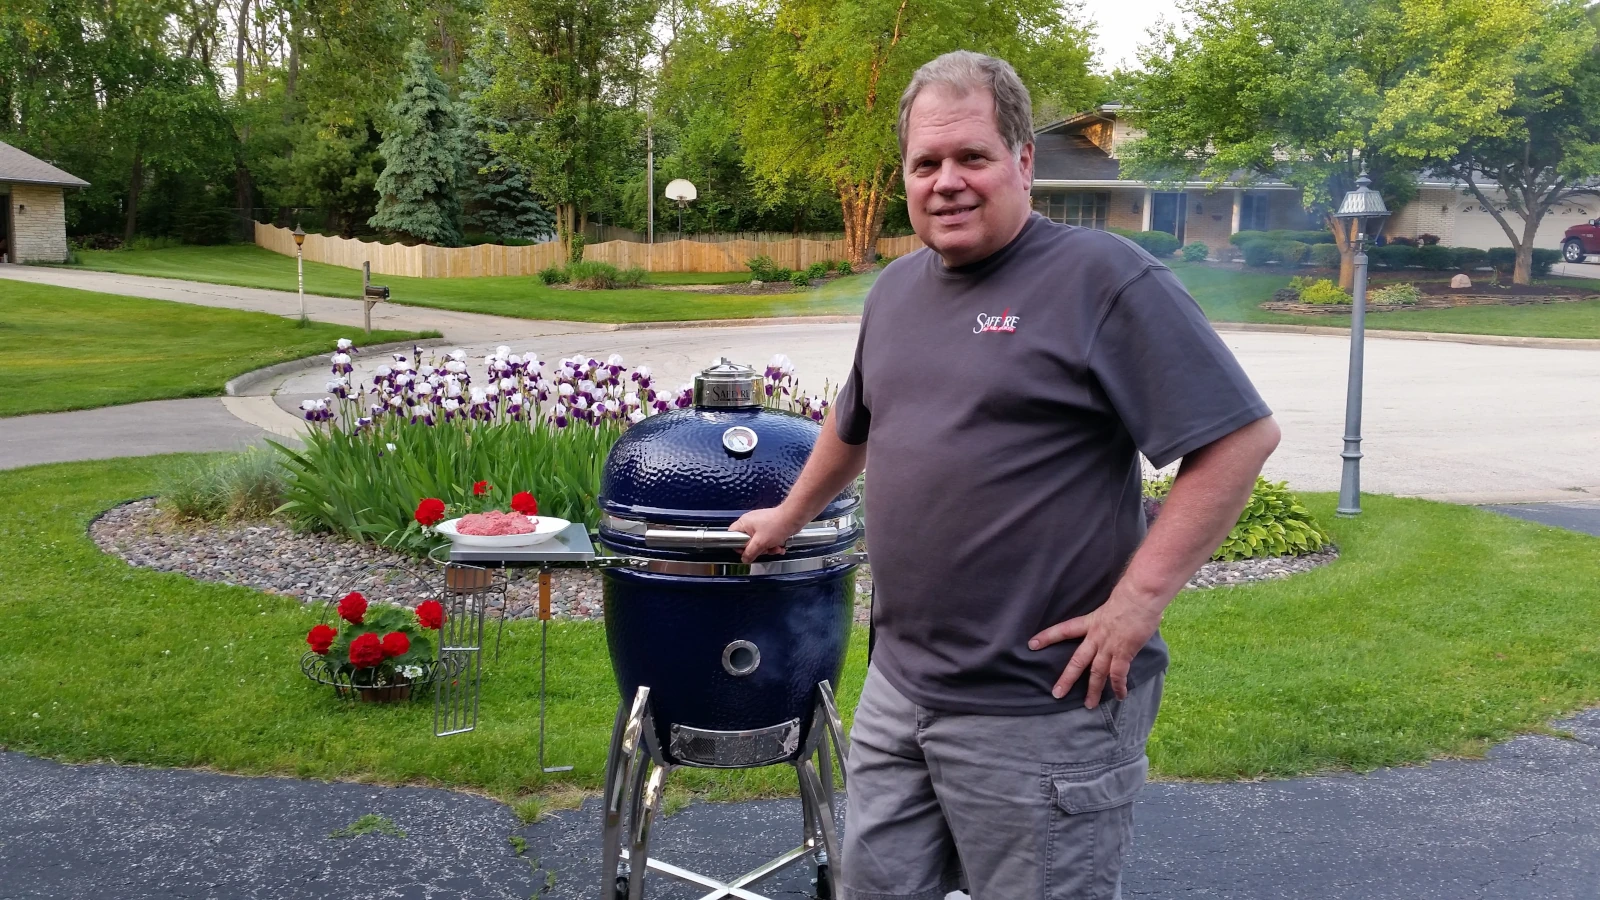 Steve standing in front of his 19" Platinum Saffire Kamado. He has his hand on his hip and the other hand on the grill's handle. There is some ground beef on the grill's side shelf, and smoke is coming out of the open Smokin' Chip Feeder port.